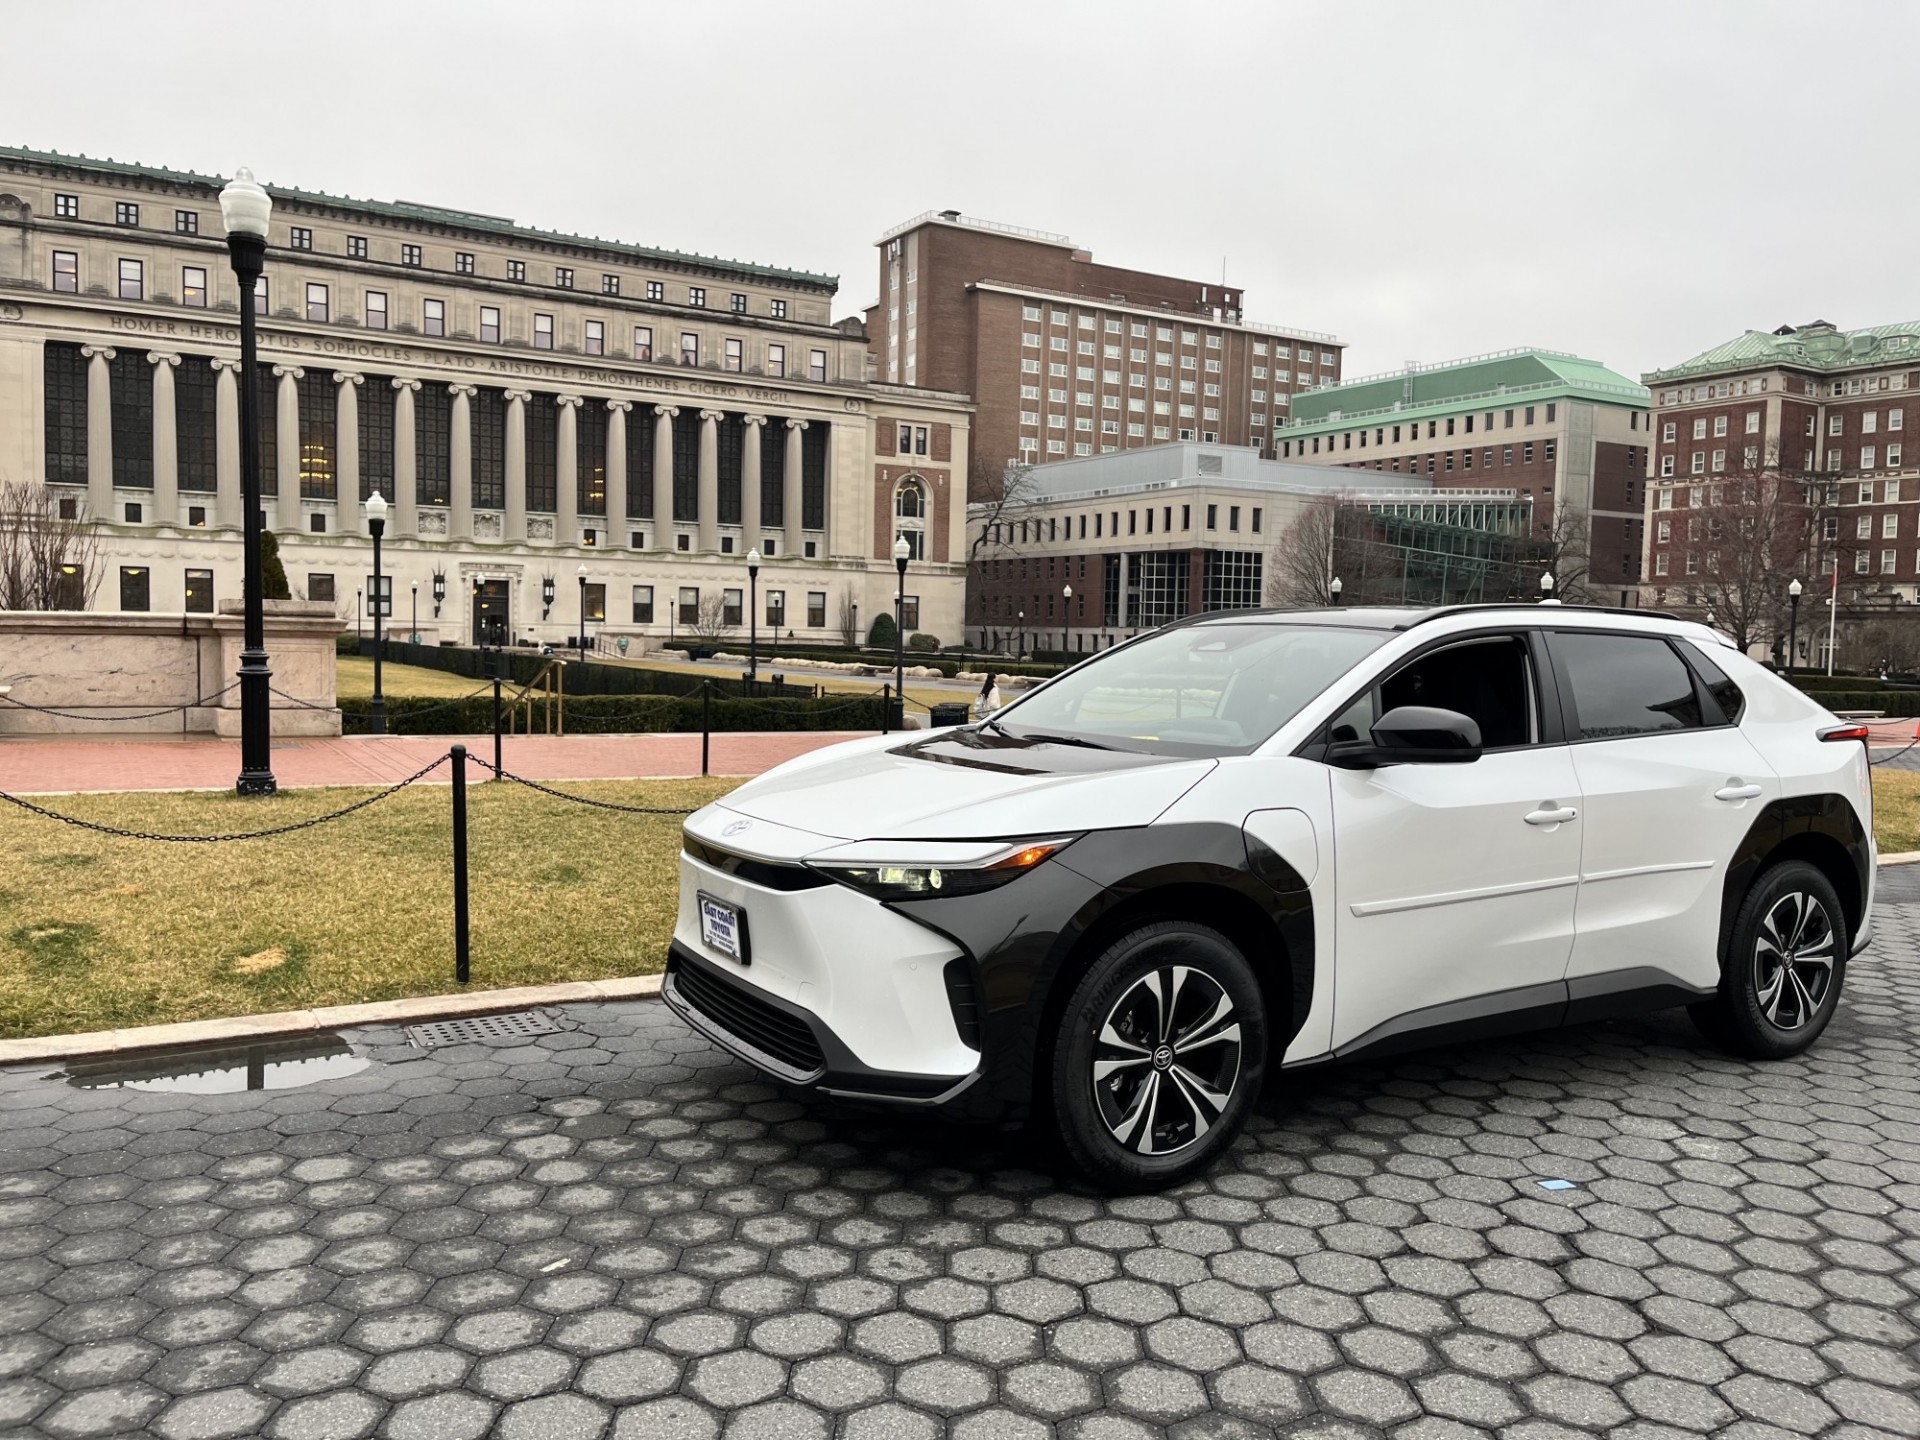 Columbia University Public Safety's Gradual Transition to Electric Vehicles  Results in 33% Reduction in Annual Fleet Emissions Since 2019